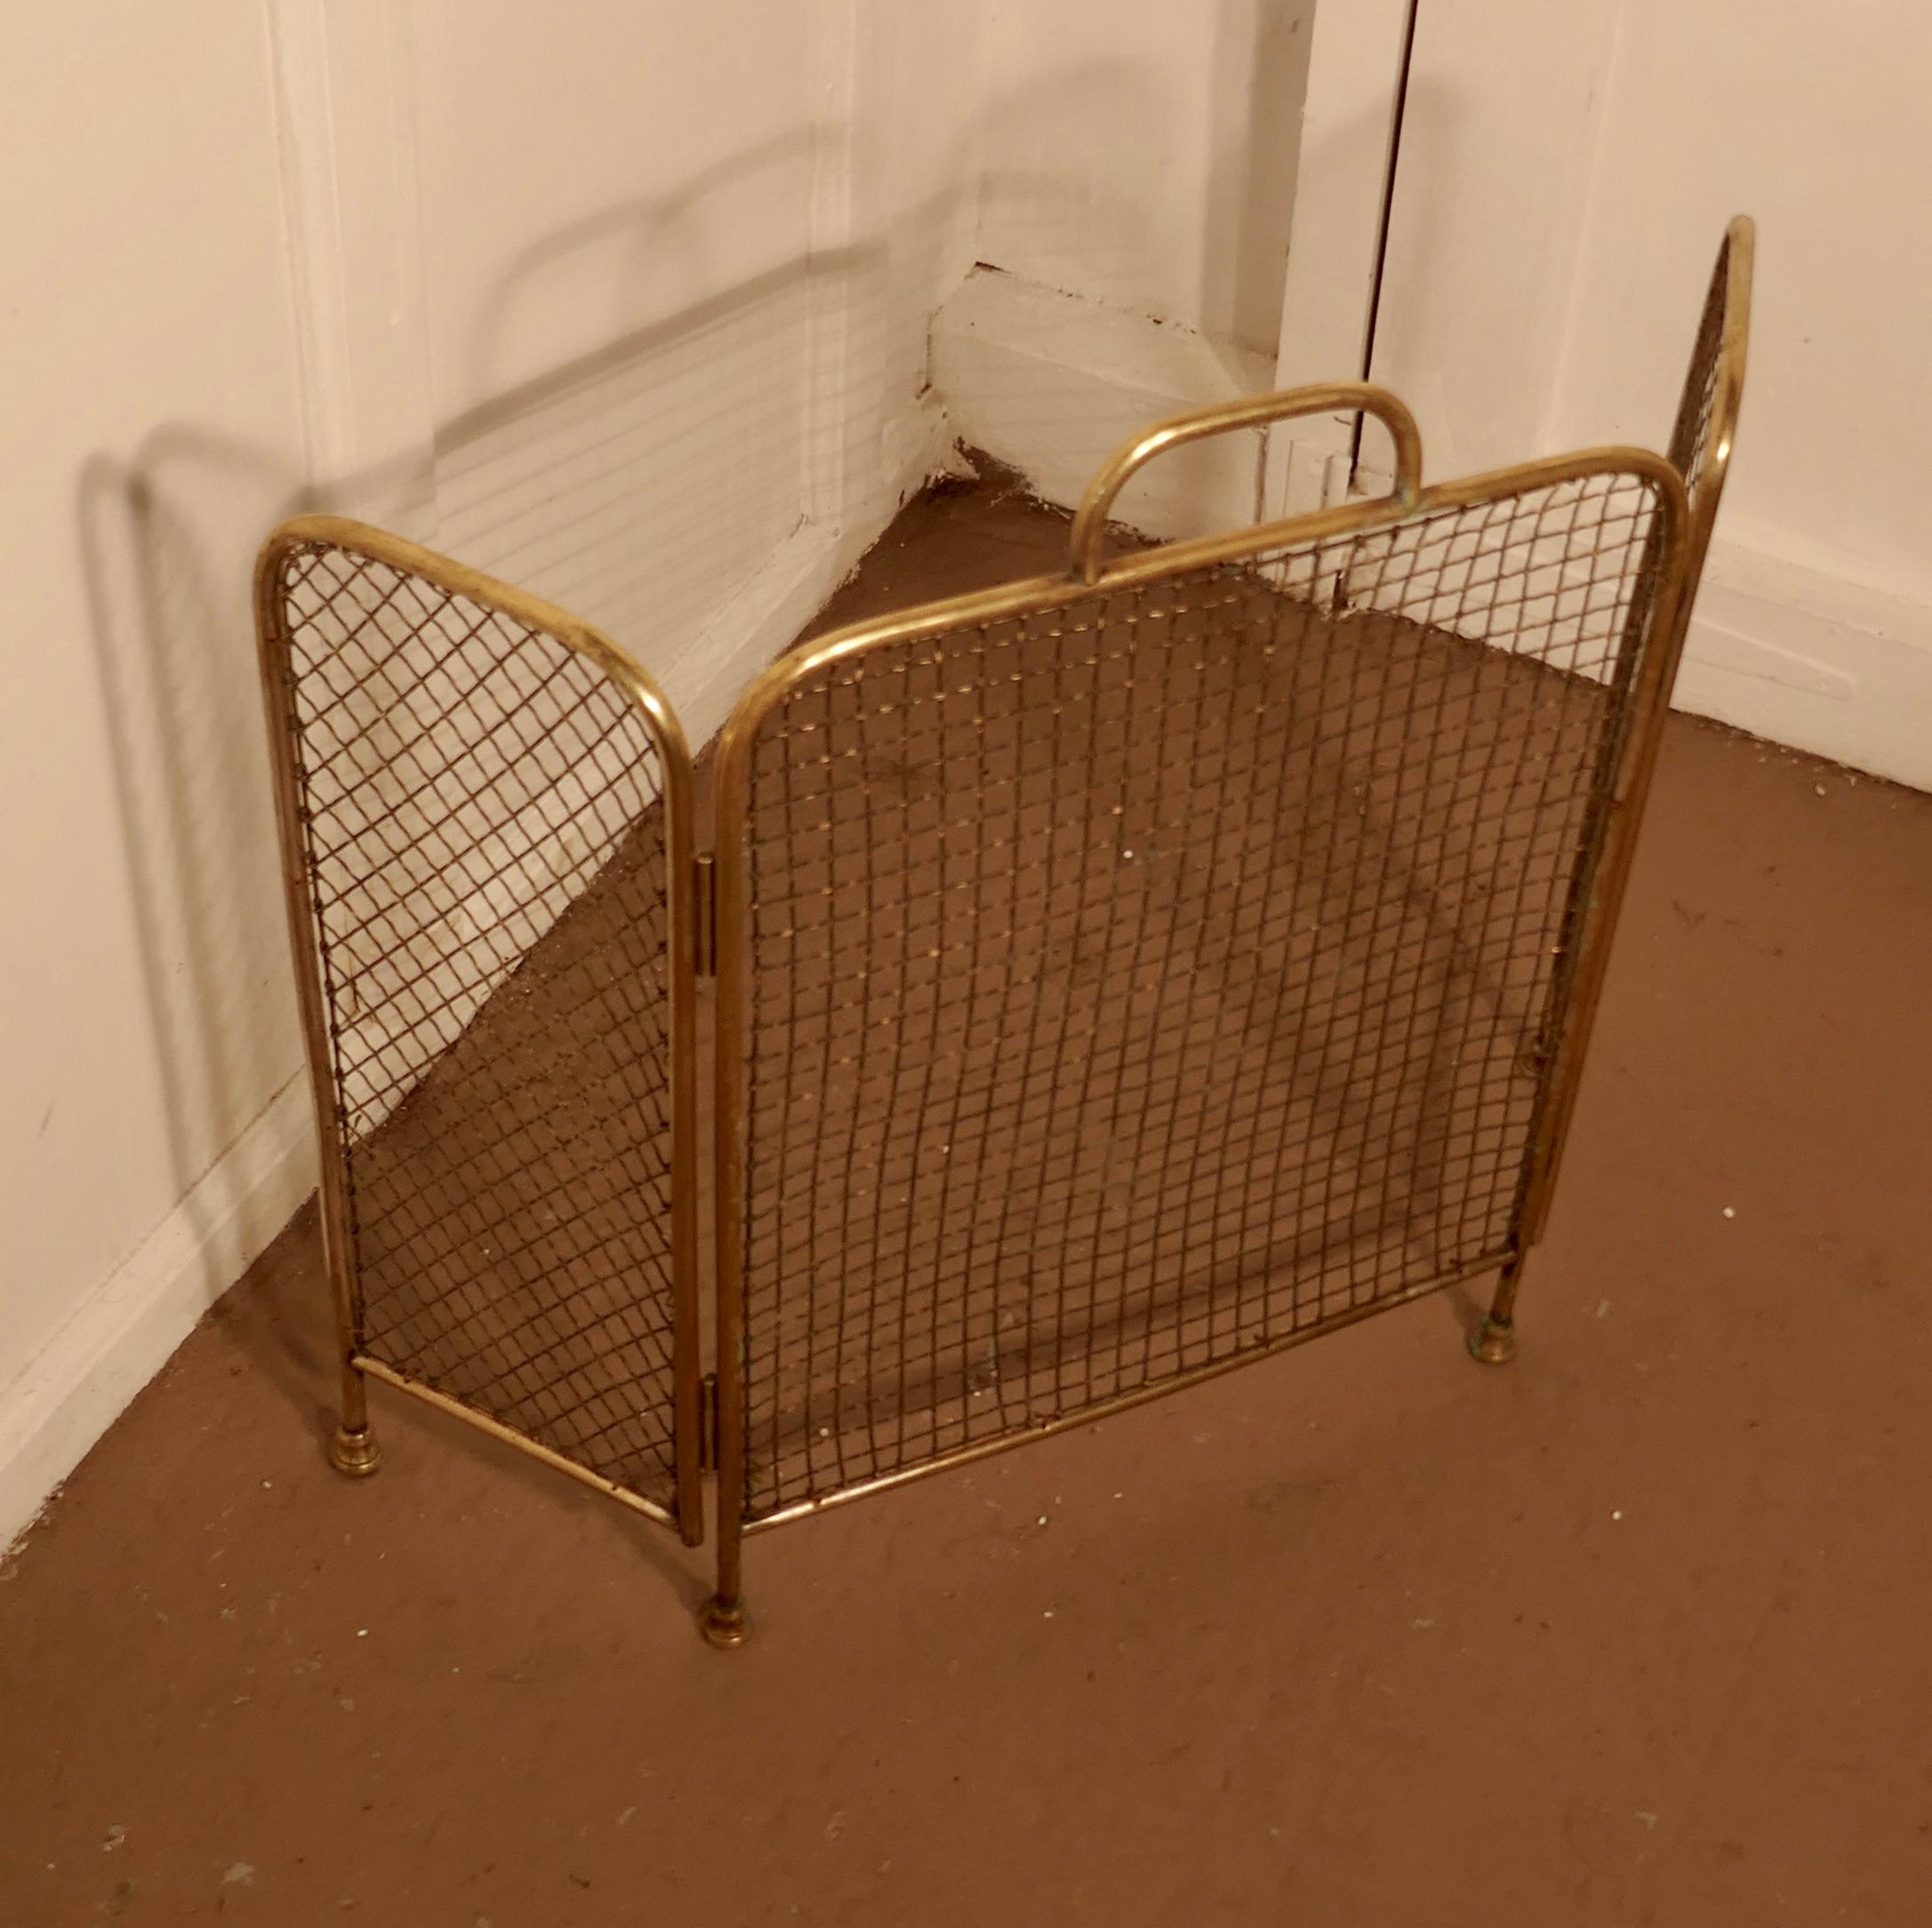 Unusual 19th century folding brass fire guard 

This is an unusual Fireguard, the guard is all made in Brass, both the frame and the mesh are brass, it has the added advantage that it folds flat for storage, and when opened out it cab have shaped